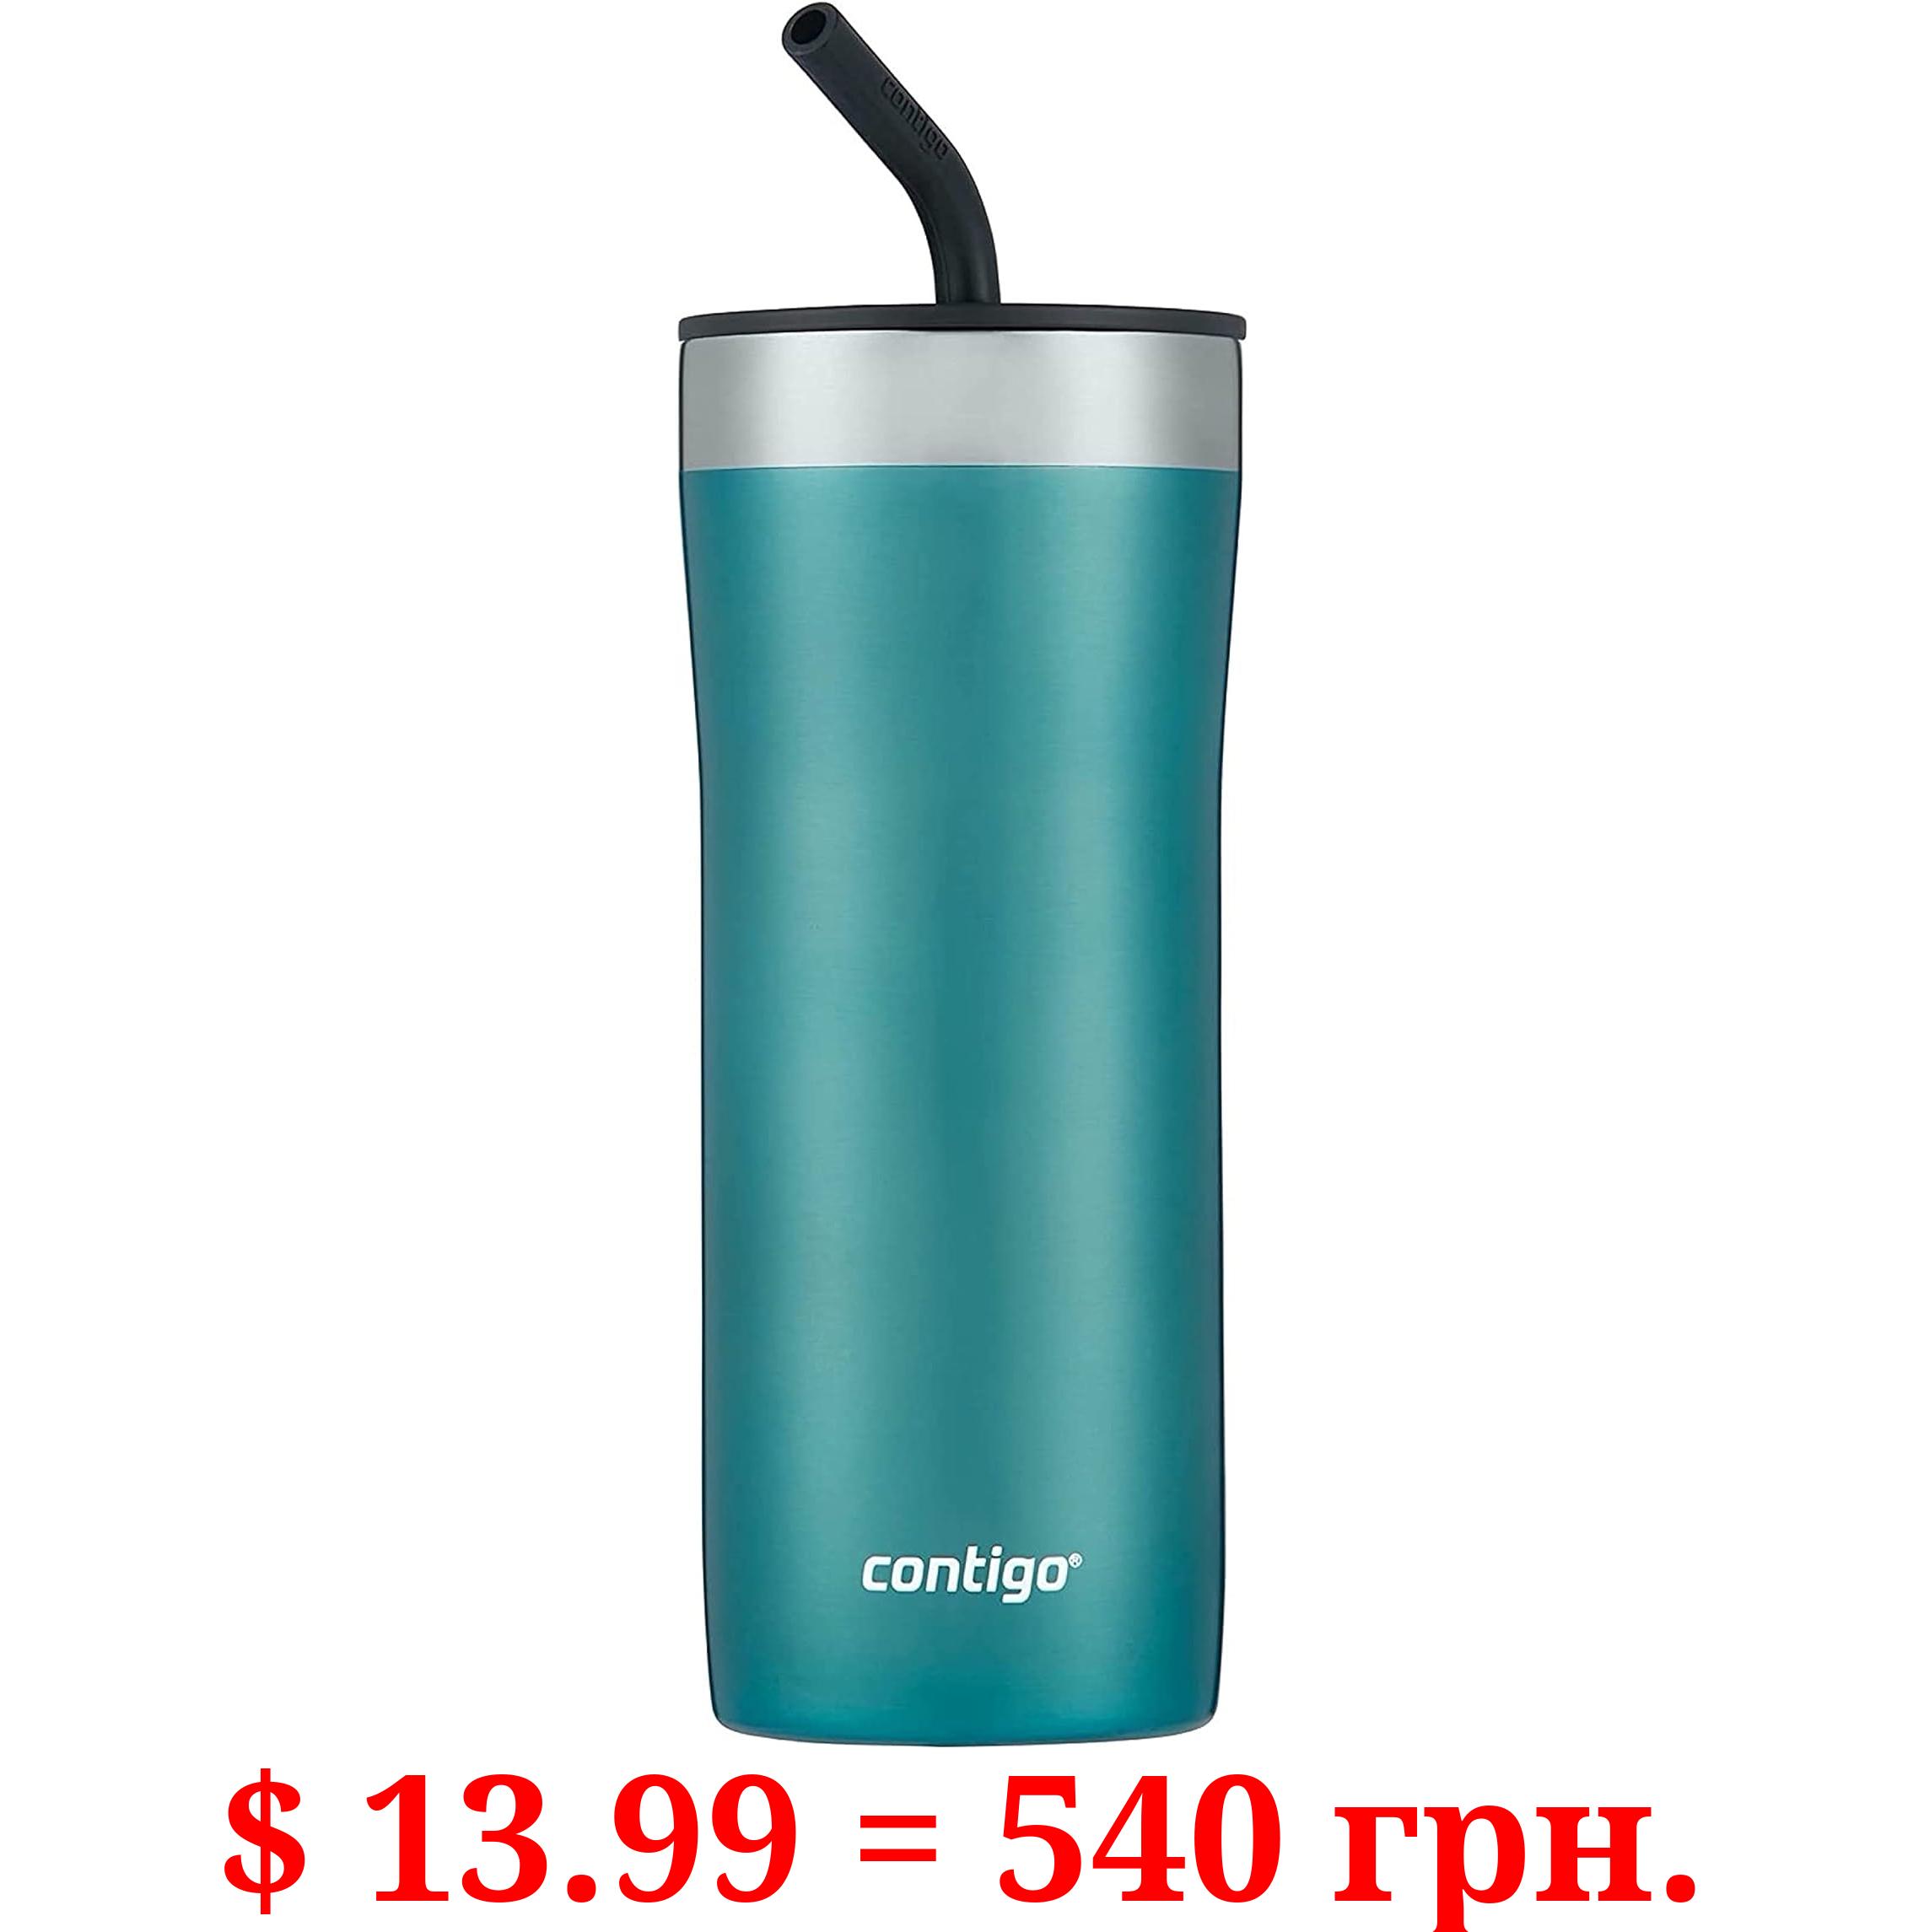 Contigo Streeterville Stainless Steel Vacuum-Insulated Tumbler with Straw and Splash-Proof Slider Lid, Keeps Drinks Hot up to 8hrs or Cold for 24hrs, Great for Travel/Work/School, 24oz Bubble Tea